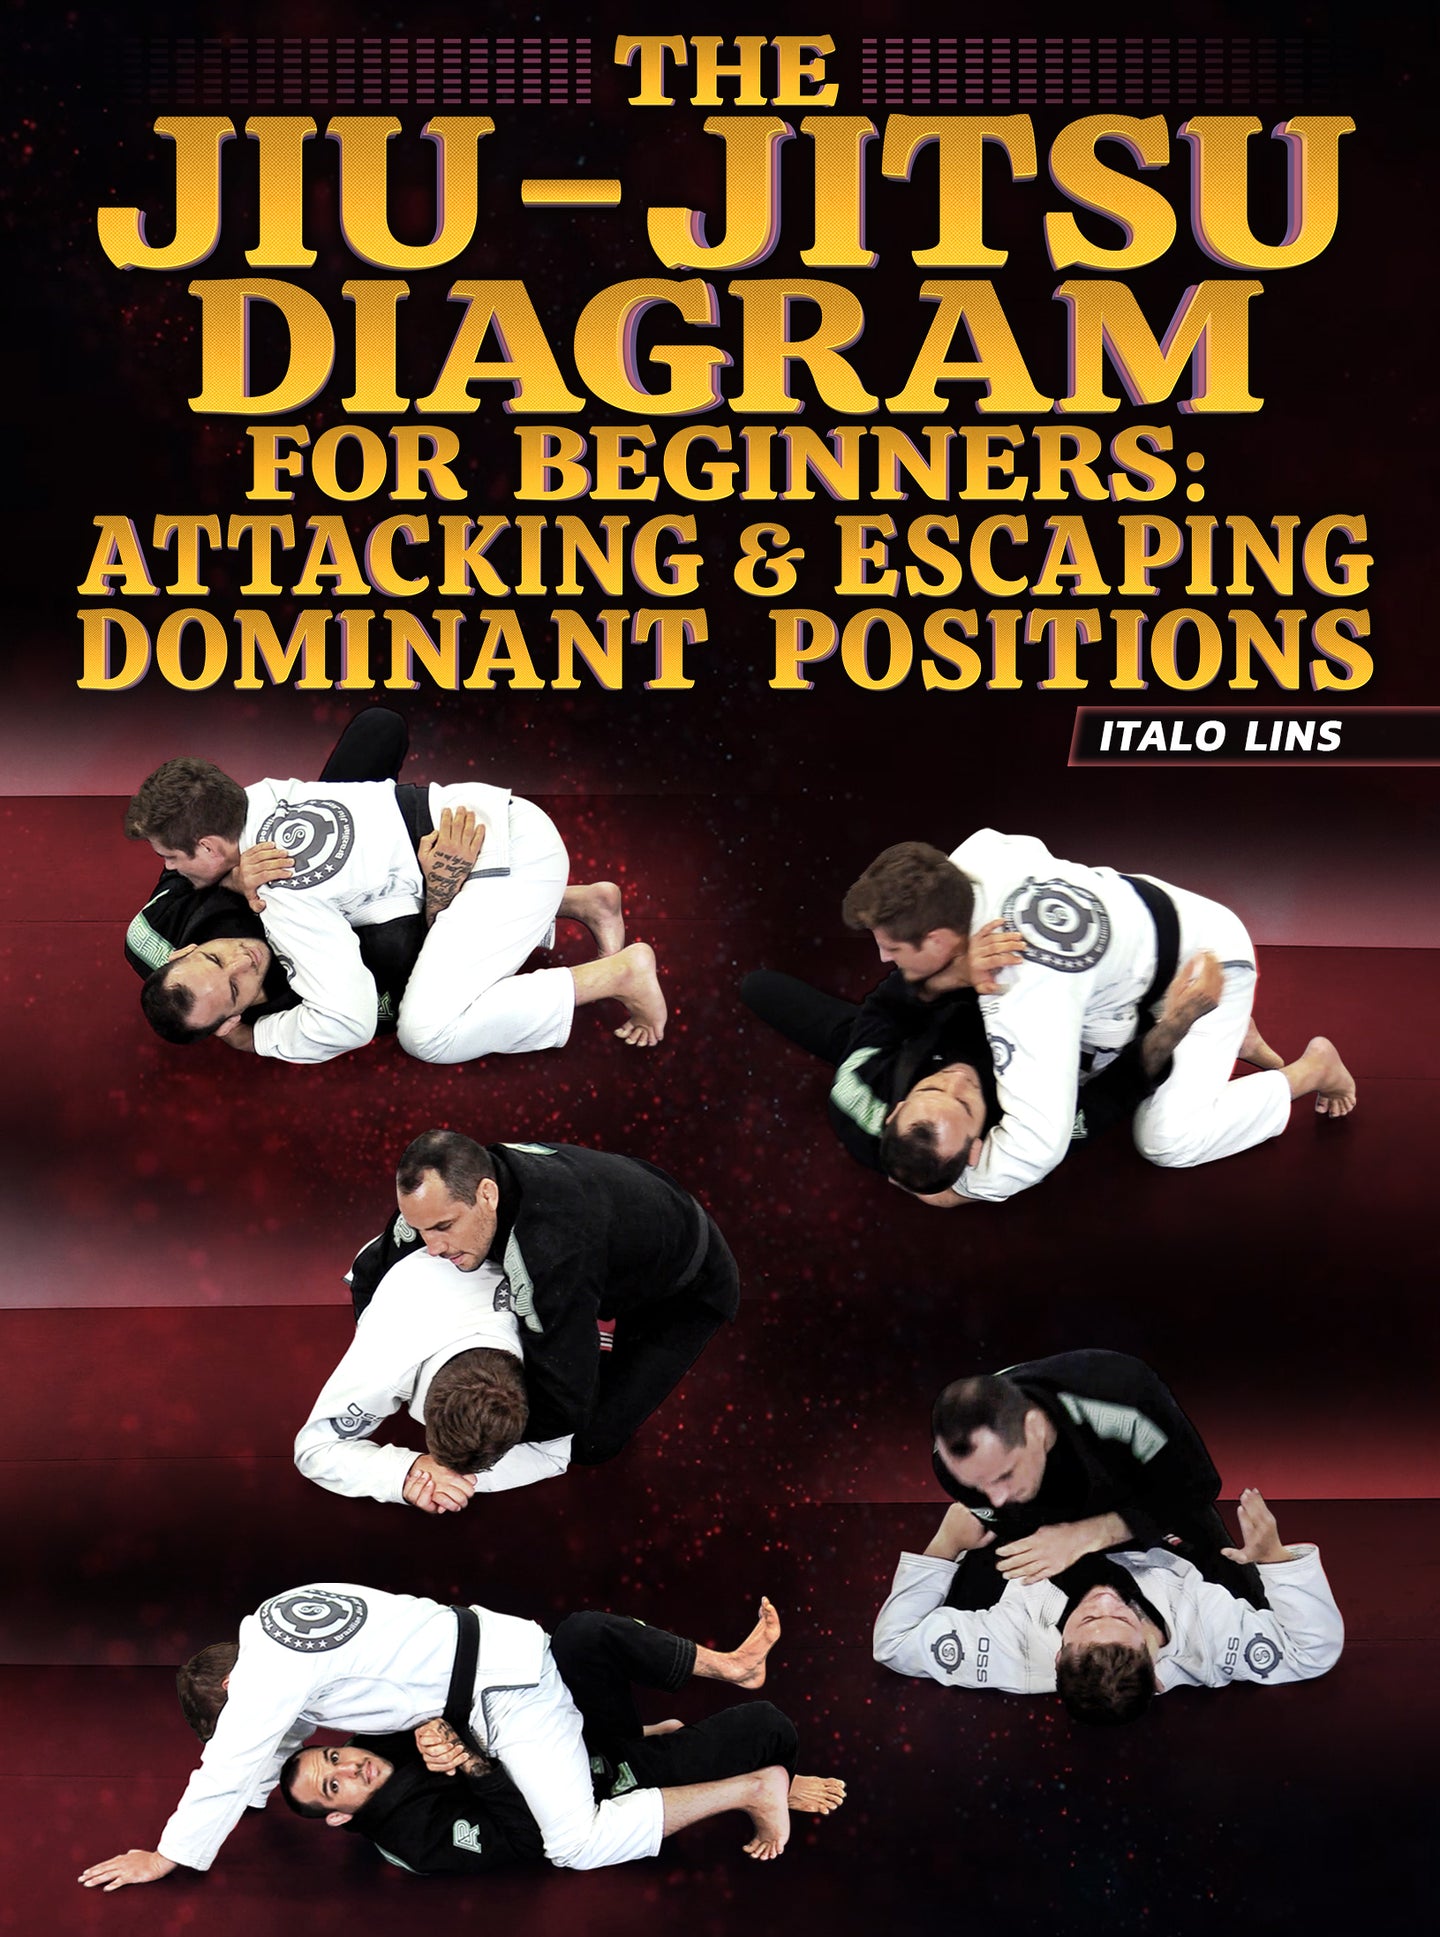 The Jiu Jitsu Diagram For Beginners: Attacking & Escaping Dominant Positions by Italo Lins - BJJ Fanatics